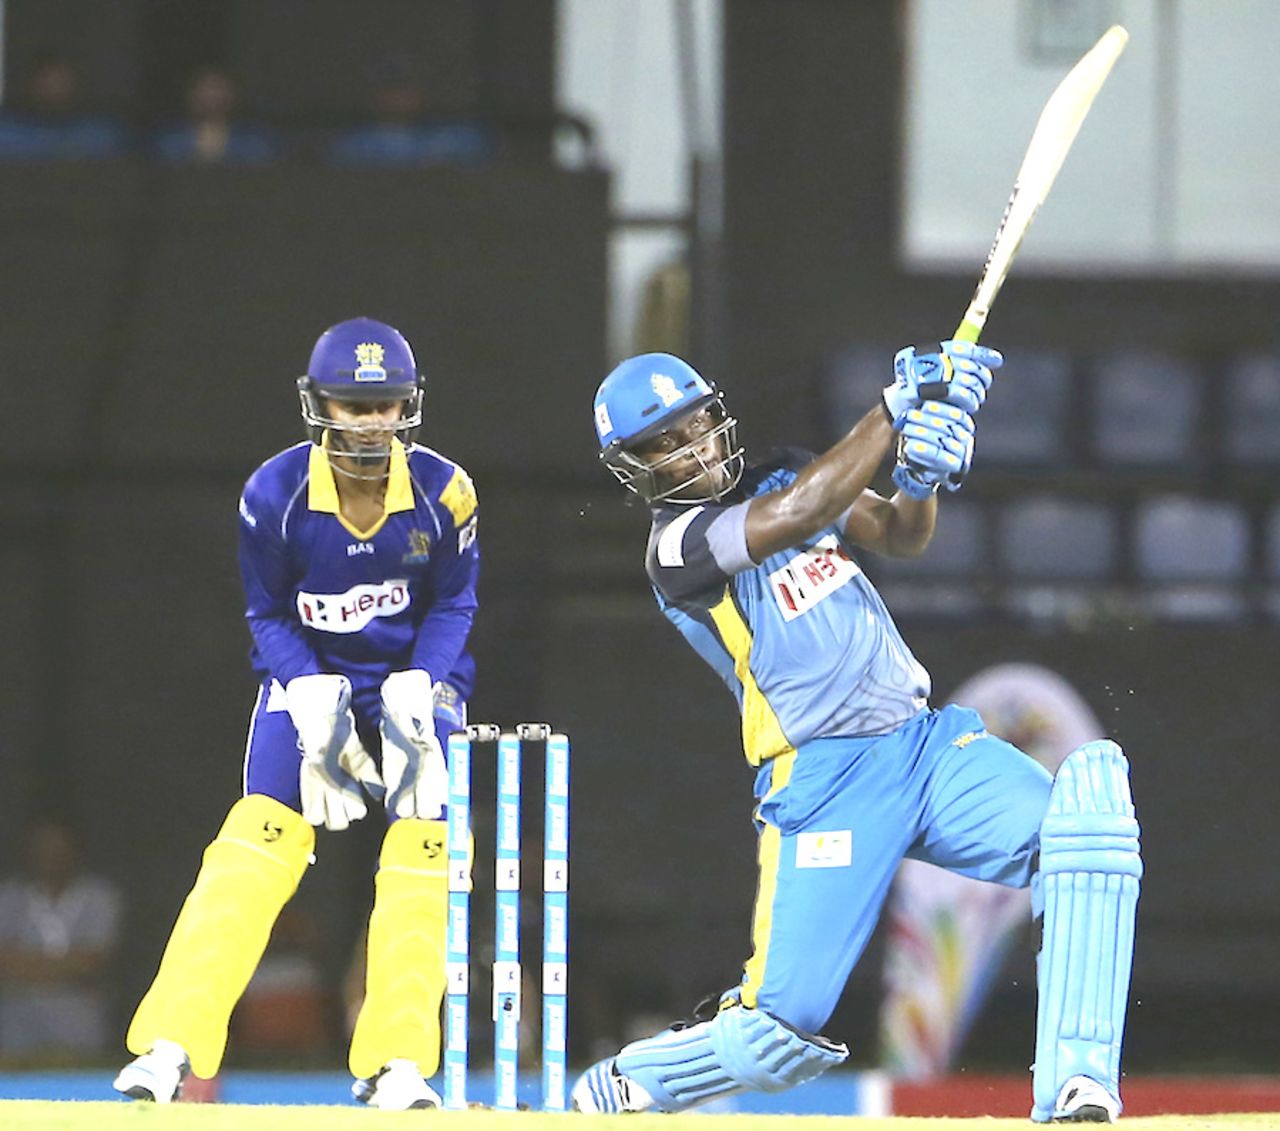 Johnson Charles smashed three sixes in his innings, St Lucia Zouks v Barbados Tridents, CPL 2014, Gros Islet, July 31, 2014